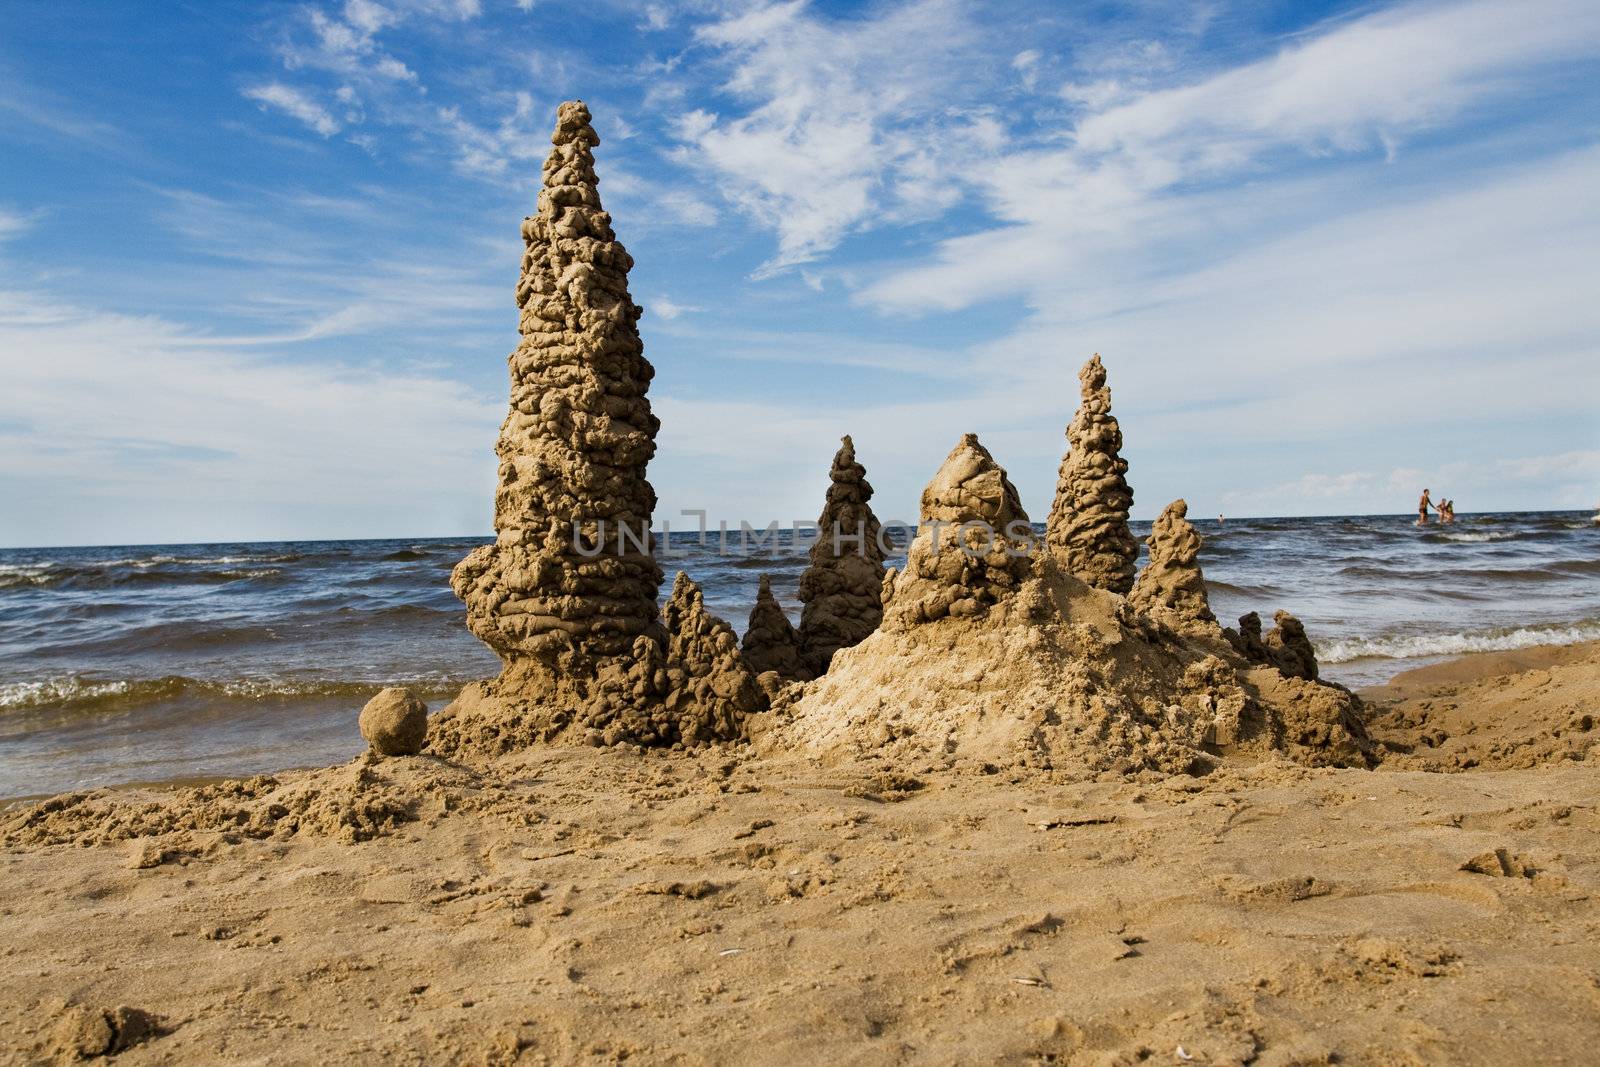 Towers of sand castle at the seaside